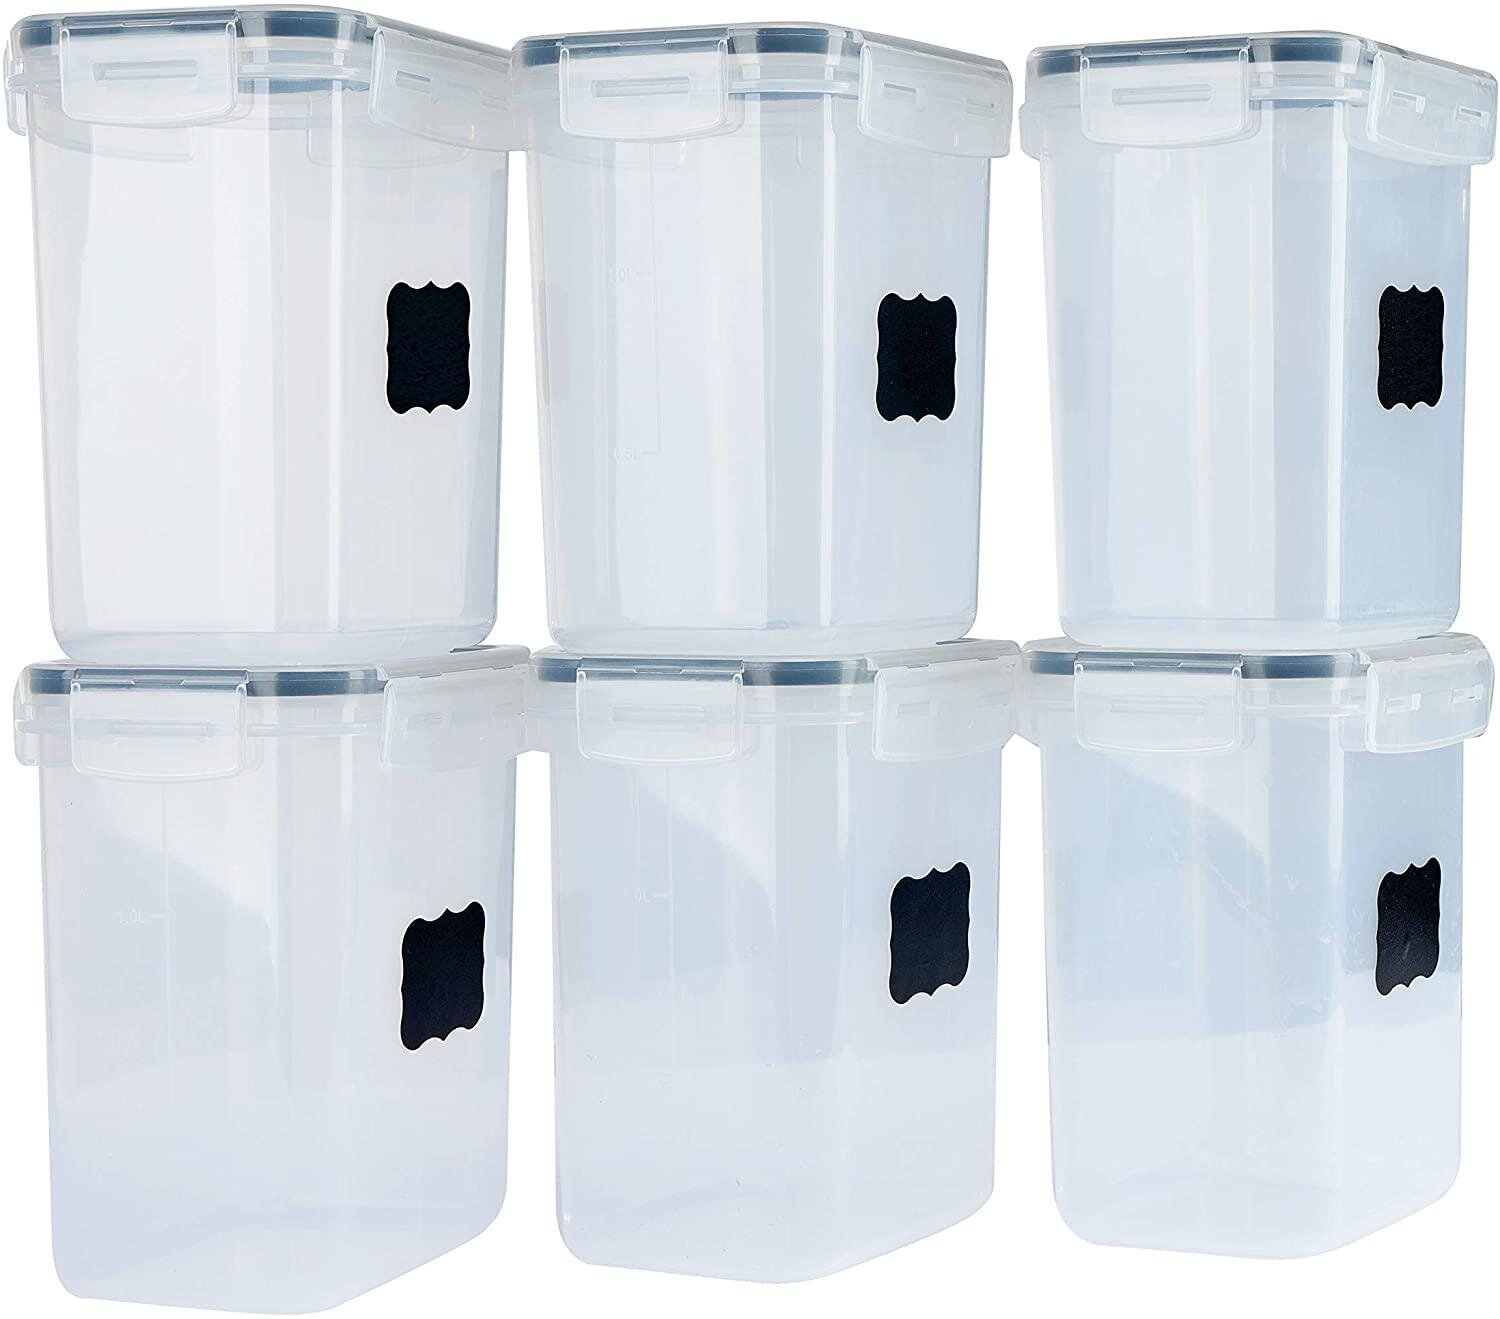 Large Airtight Food Storage Containers With Lids 6 Piece Set Leak proof BPA Free